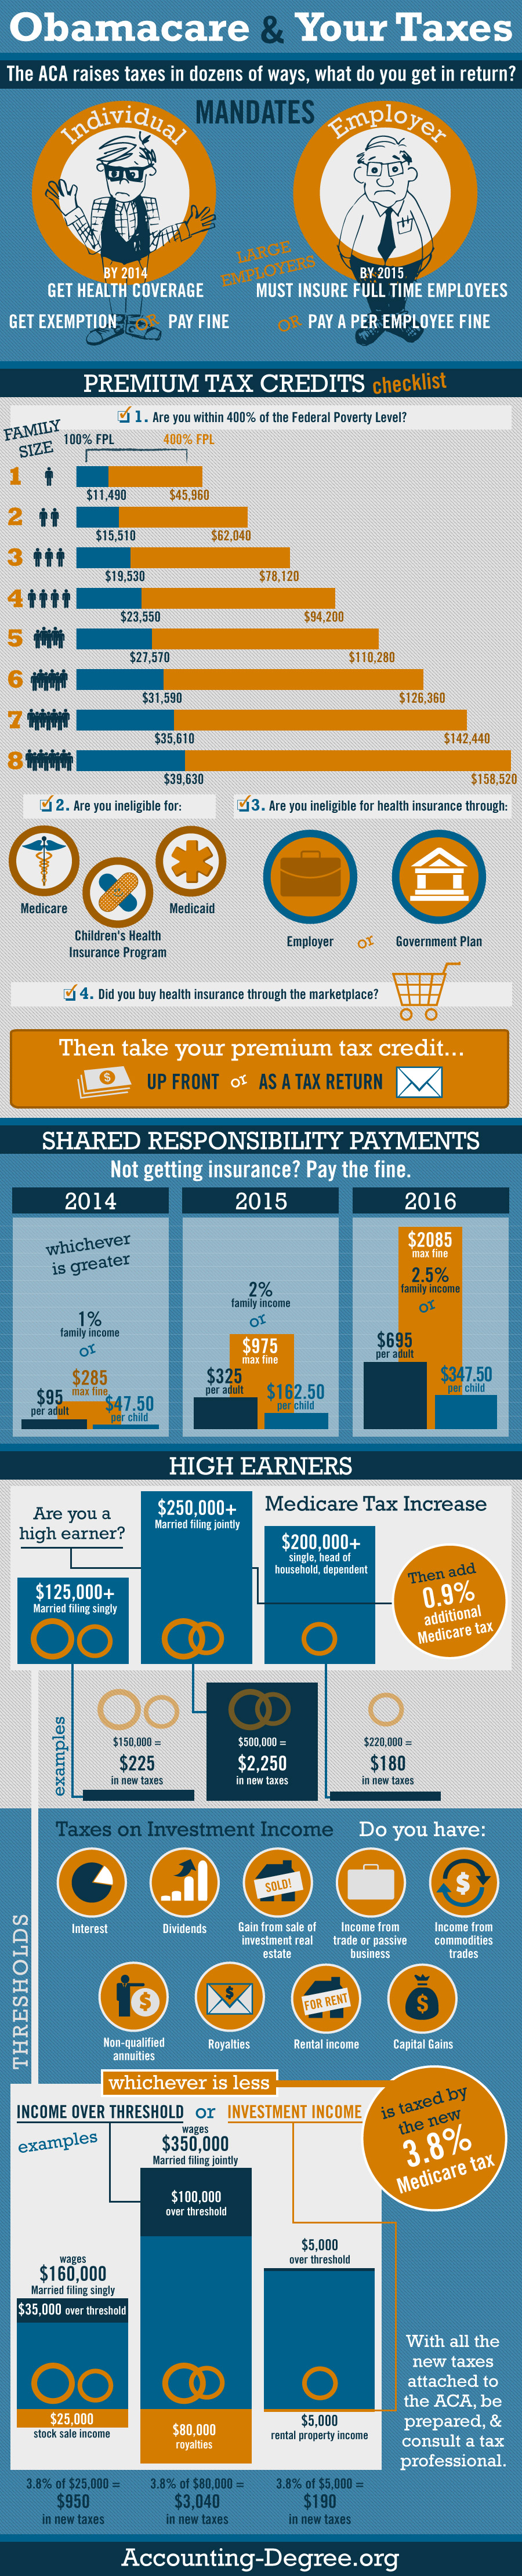 Obamacare and Your Taxes